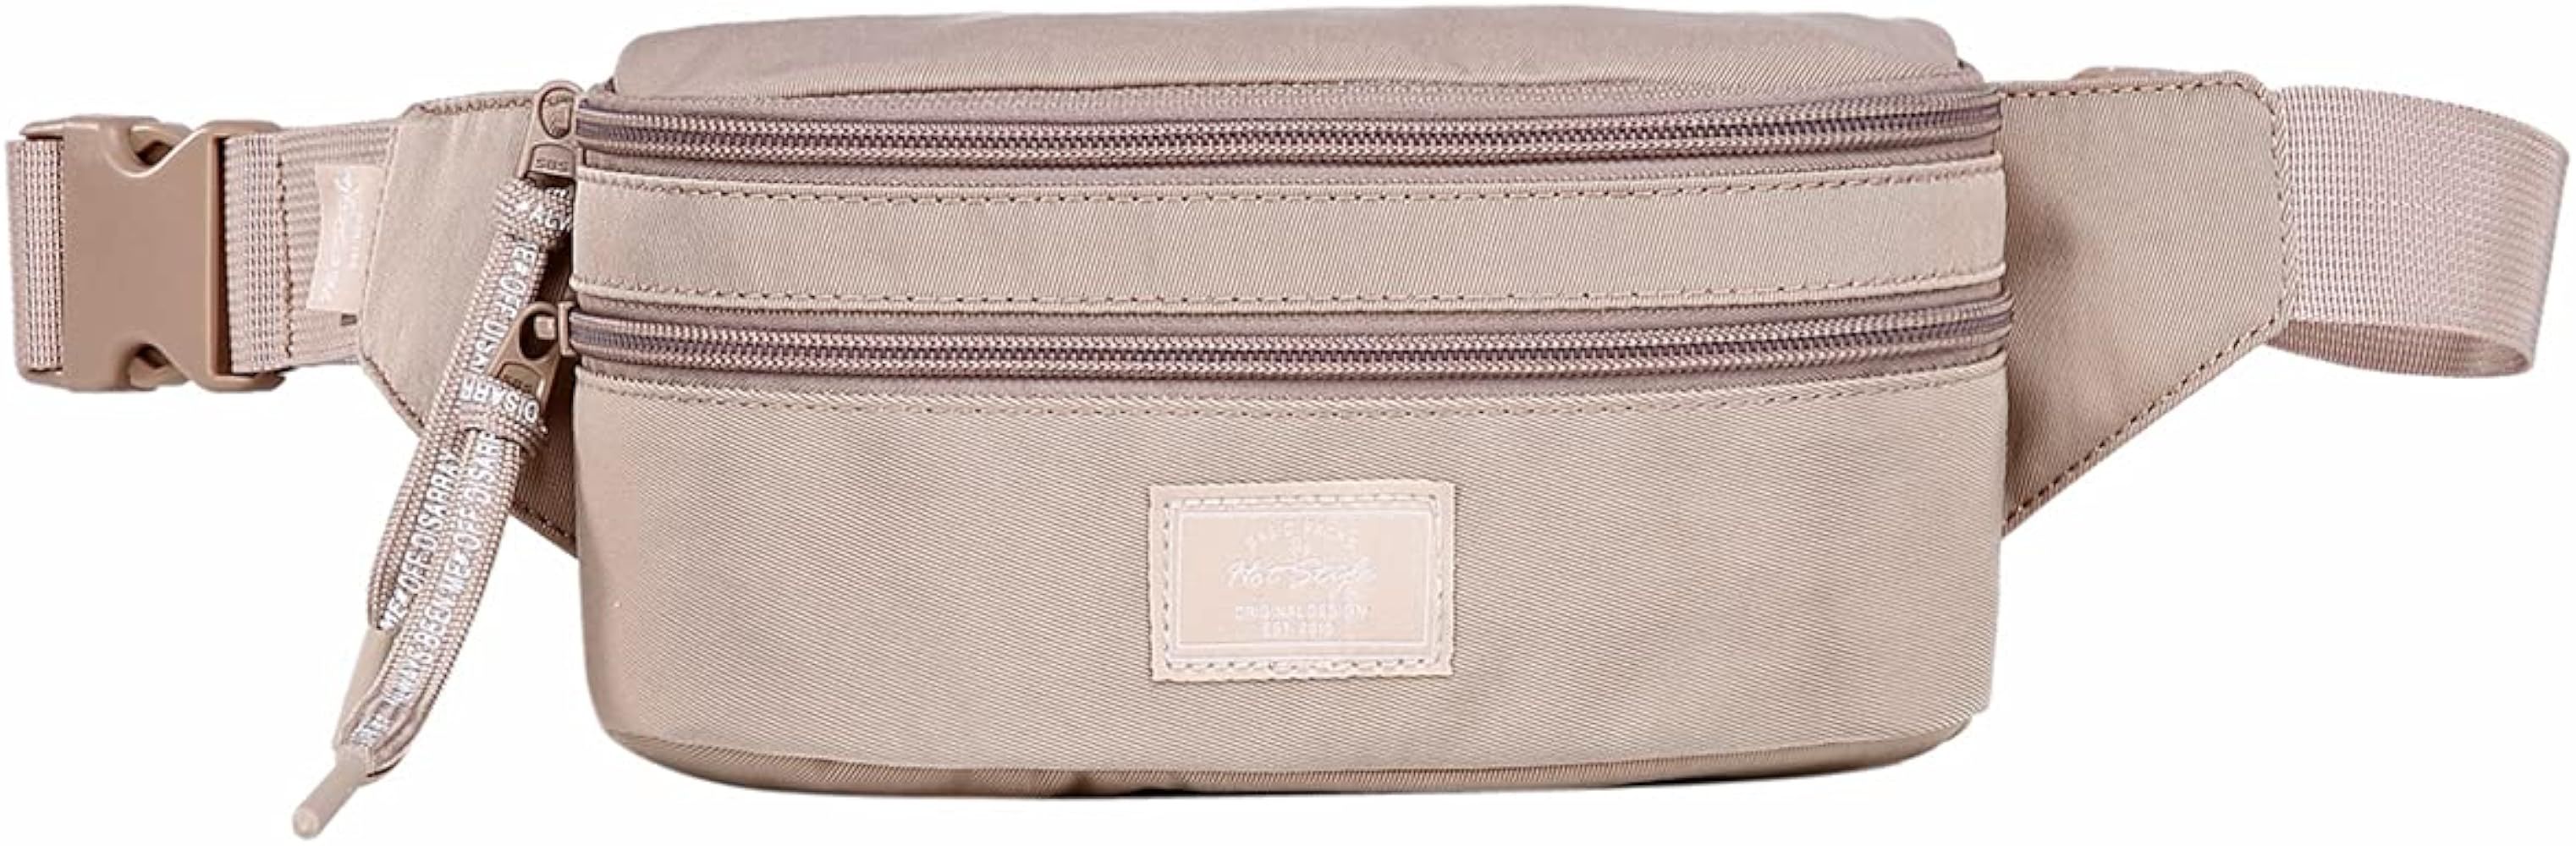 HotStyle 521s Small Fanny Pack Fashion Waist Bag Cute for Women, 8.0"x2.5"x4.3" | Amazon (US)